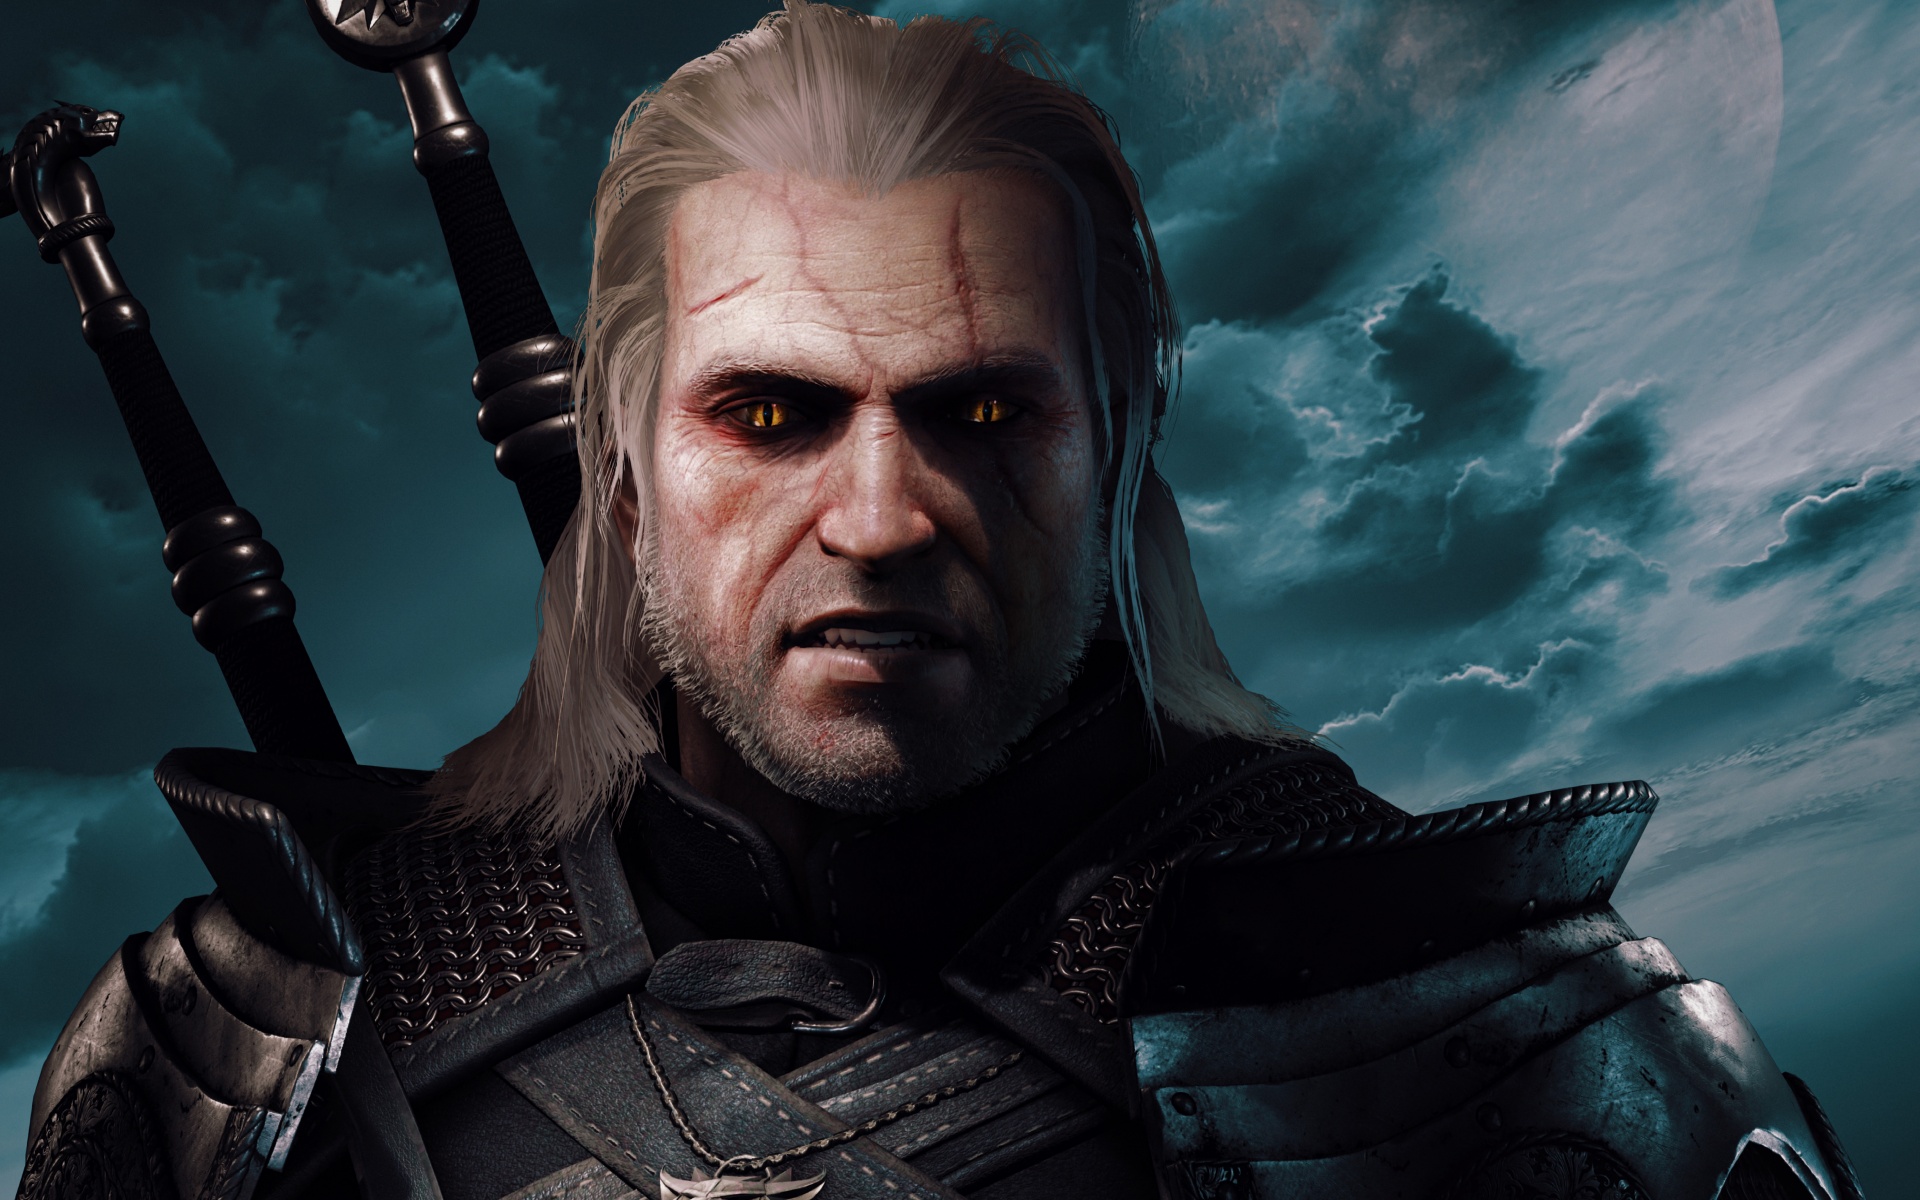 Witcher 3 4K Wallpaper 52 images